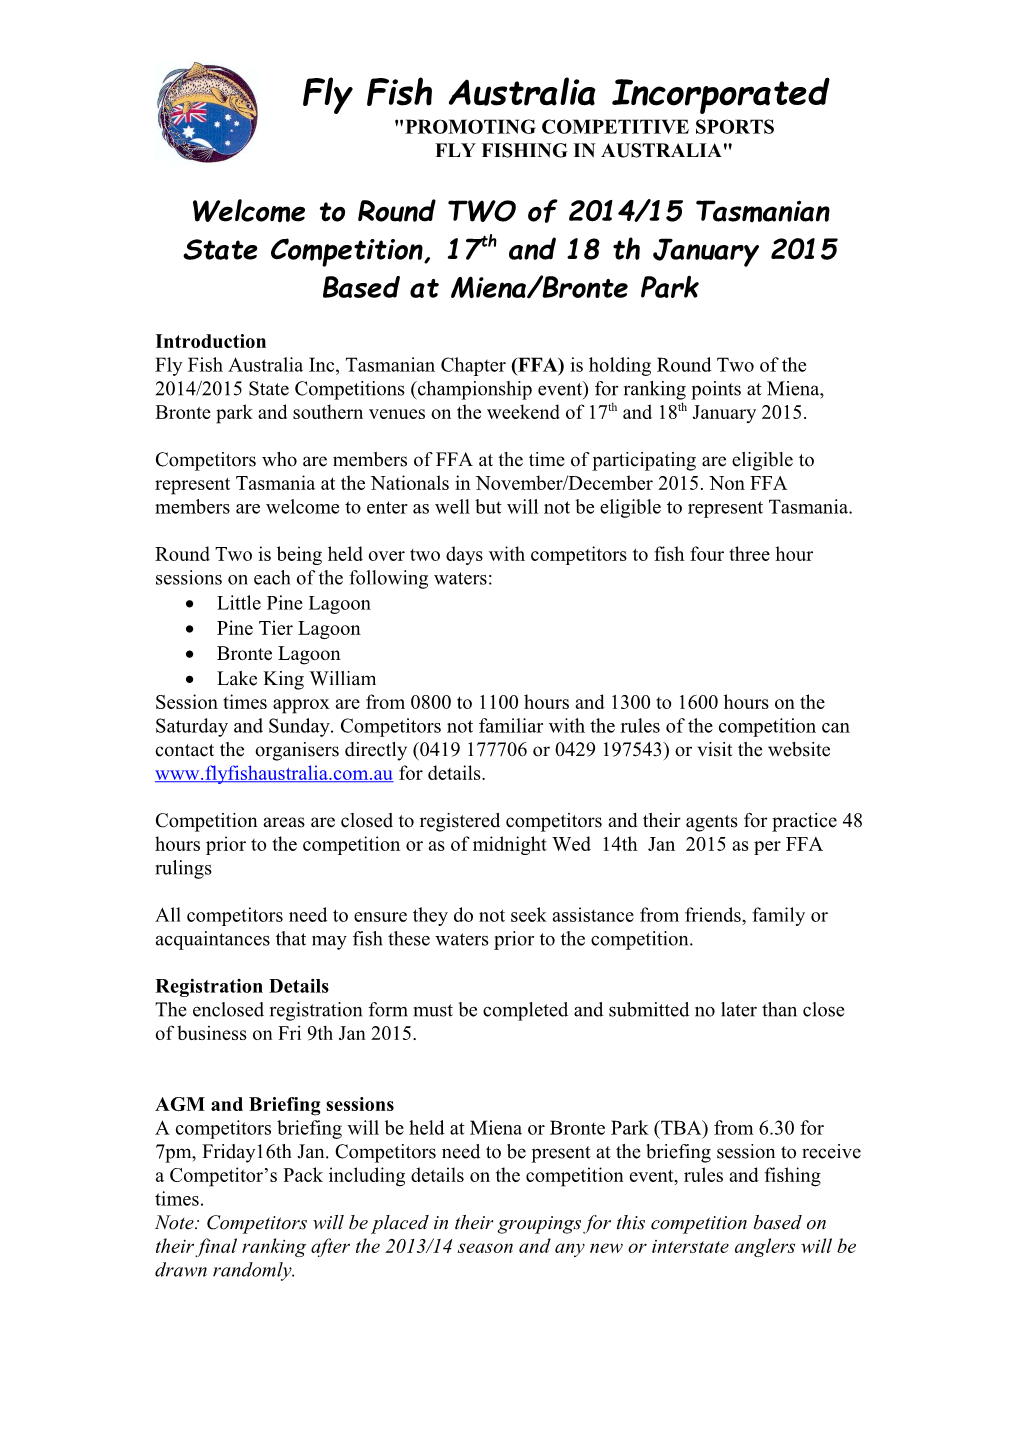 Welcome to Round TWO of 2014/15 Tasmanian State Competition, 17Th and 18 Th January 2015